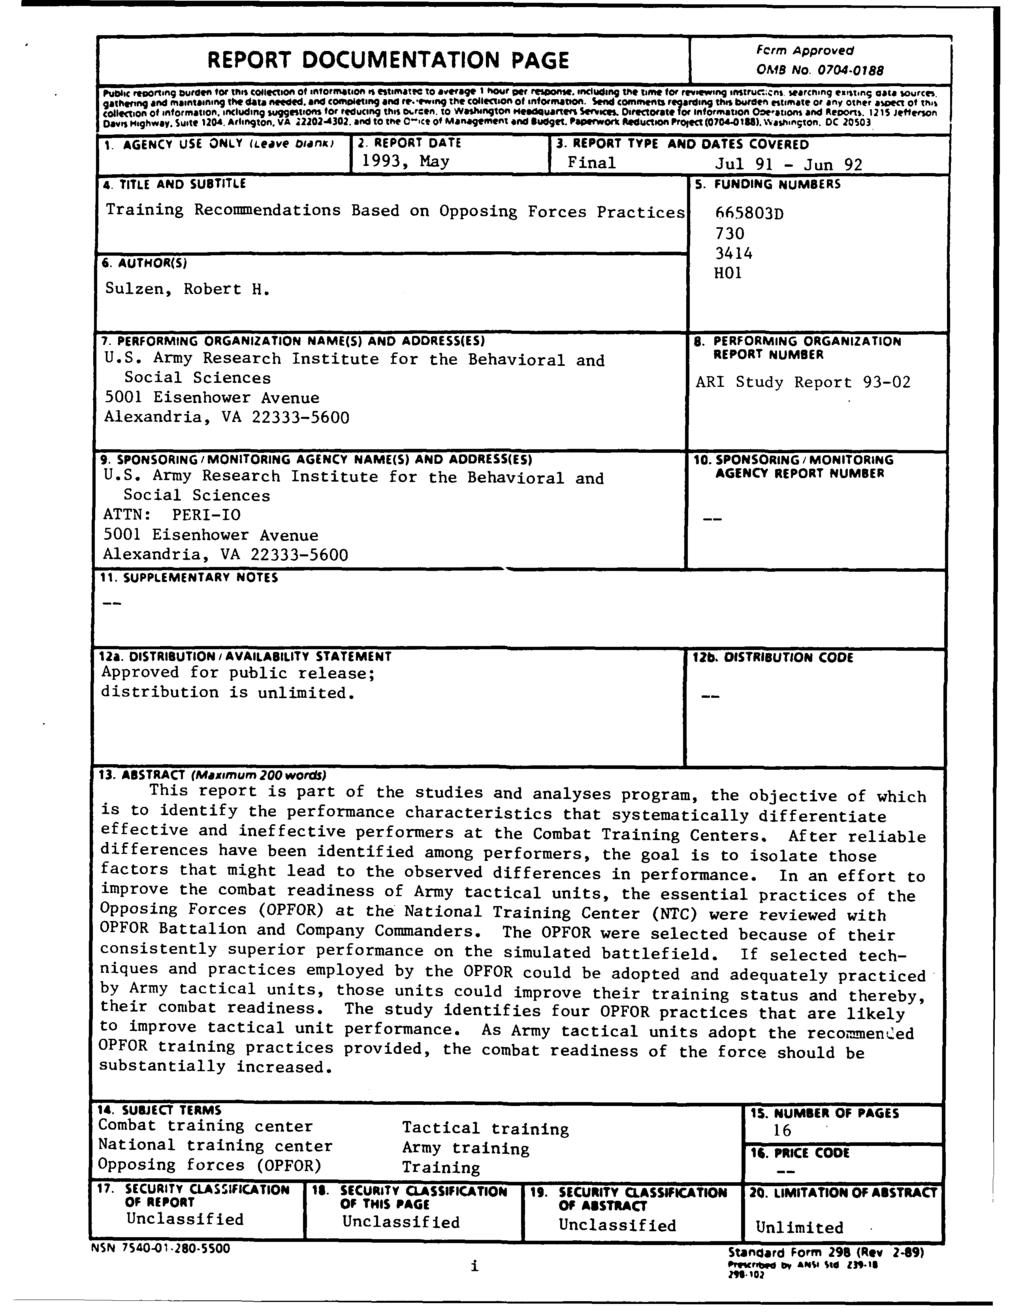 Fcrm Approvedl REPORT DOCUMENTATION PAGE ofm, No. 0704-018 Public r lg bl"d10" 1 O19 t0= s c l Ct IOf Of IntOrmation v. tm ite to average I hour per response.